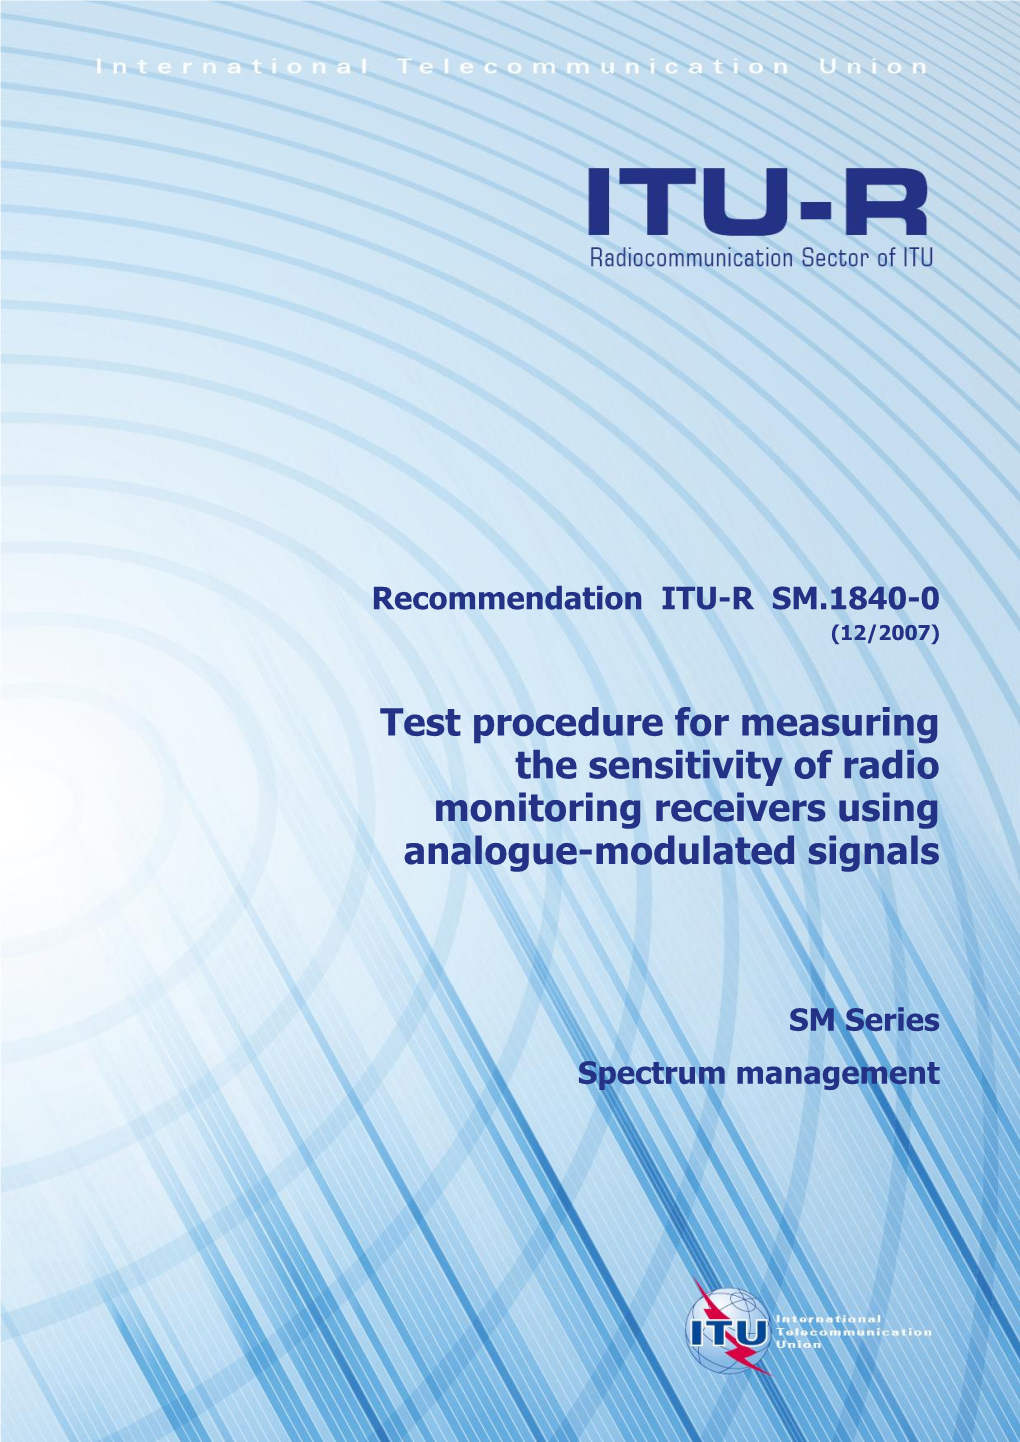 Test Procedure for Measuring the Sensitivity of Radio Monitoring Receivers Using Analogue-Modulated Signals